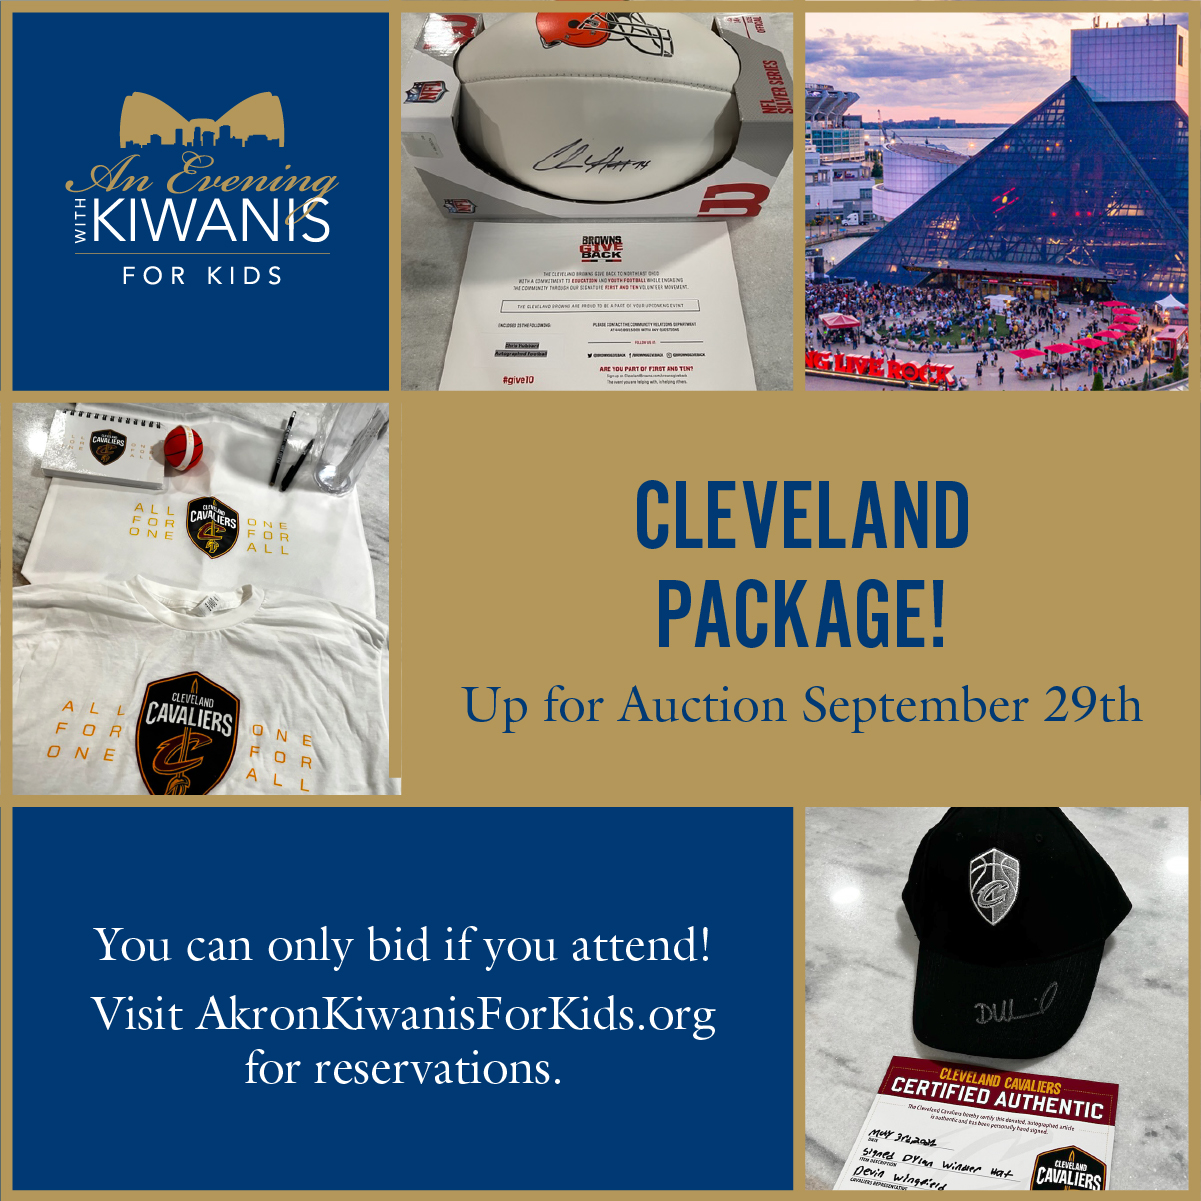 cleveland browns and cavaliers merchandise, Rock Hall tickets